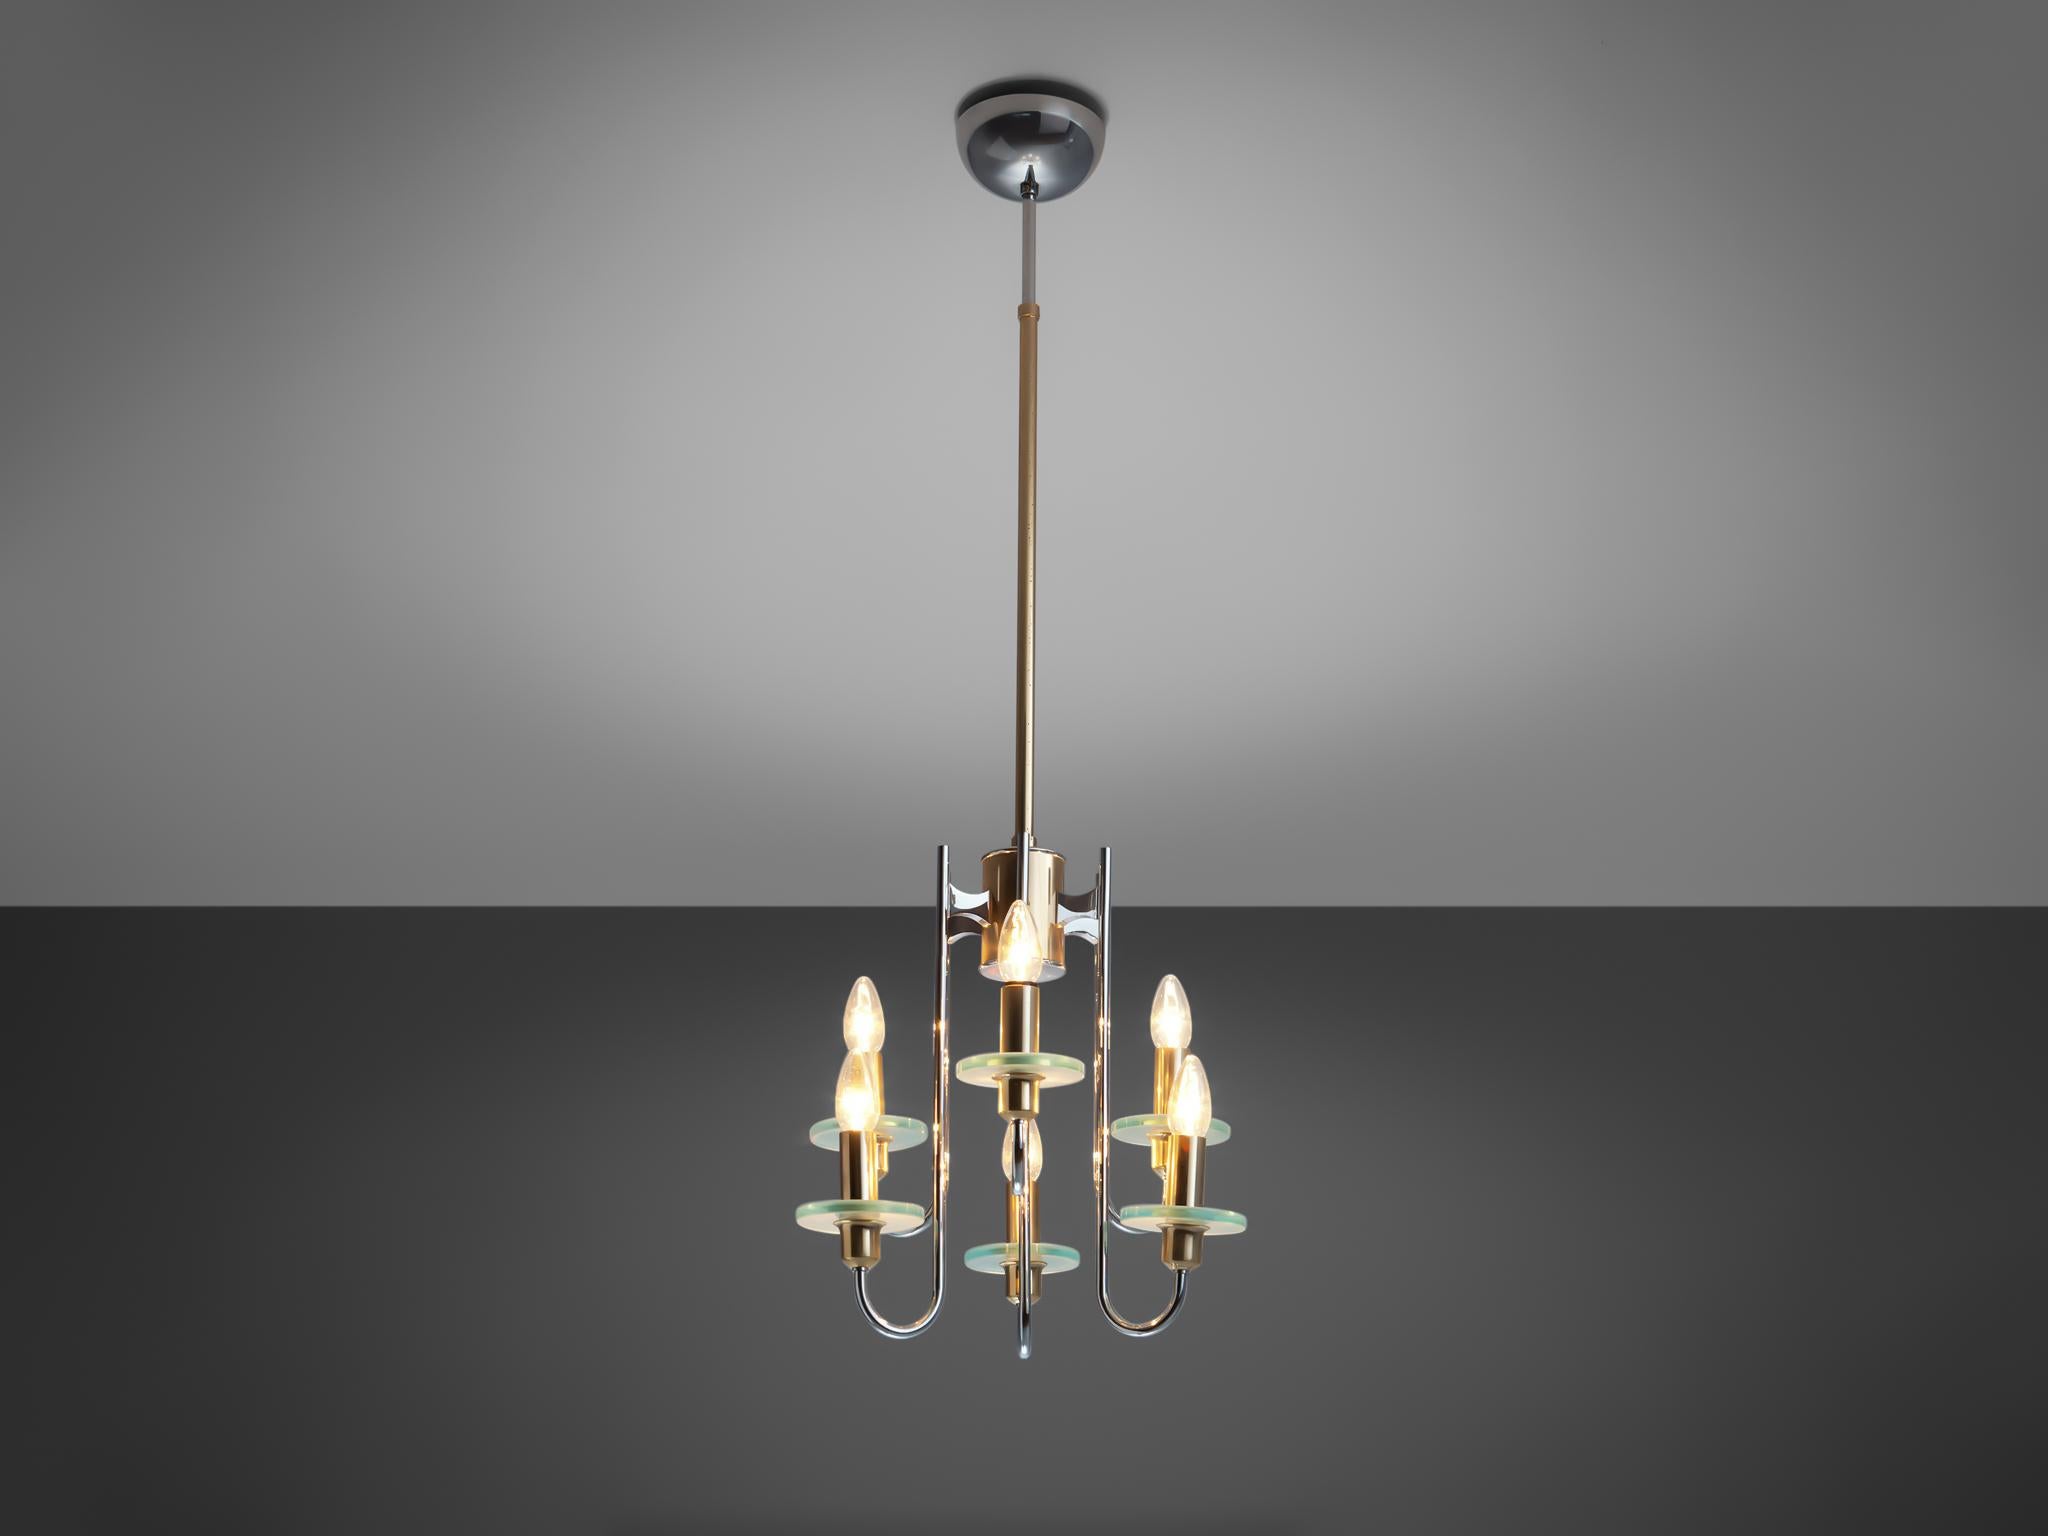 Gaetano Sciolari, chandelier, frosted glass, chrome, brass, steel, aluminum, Italy, 1970s

This subtle and modern chandelier features elegant curved shaped chrome tubes which are attached to a frame creating this striking spatial arrangement. All